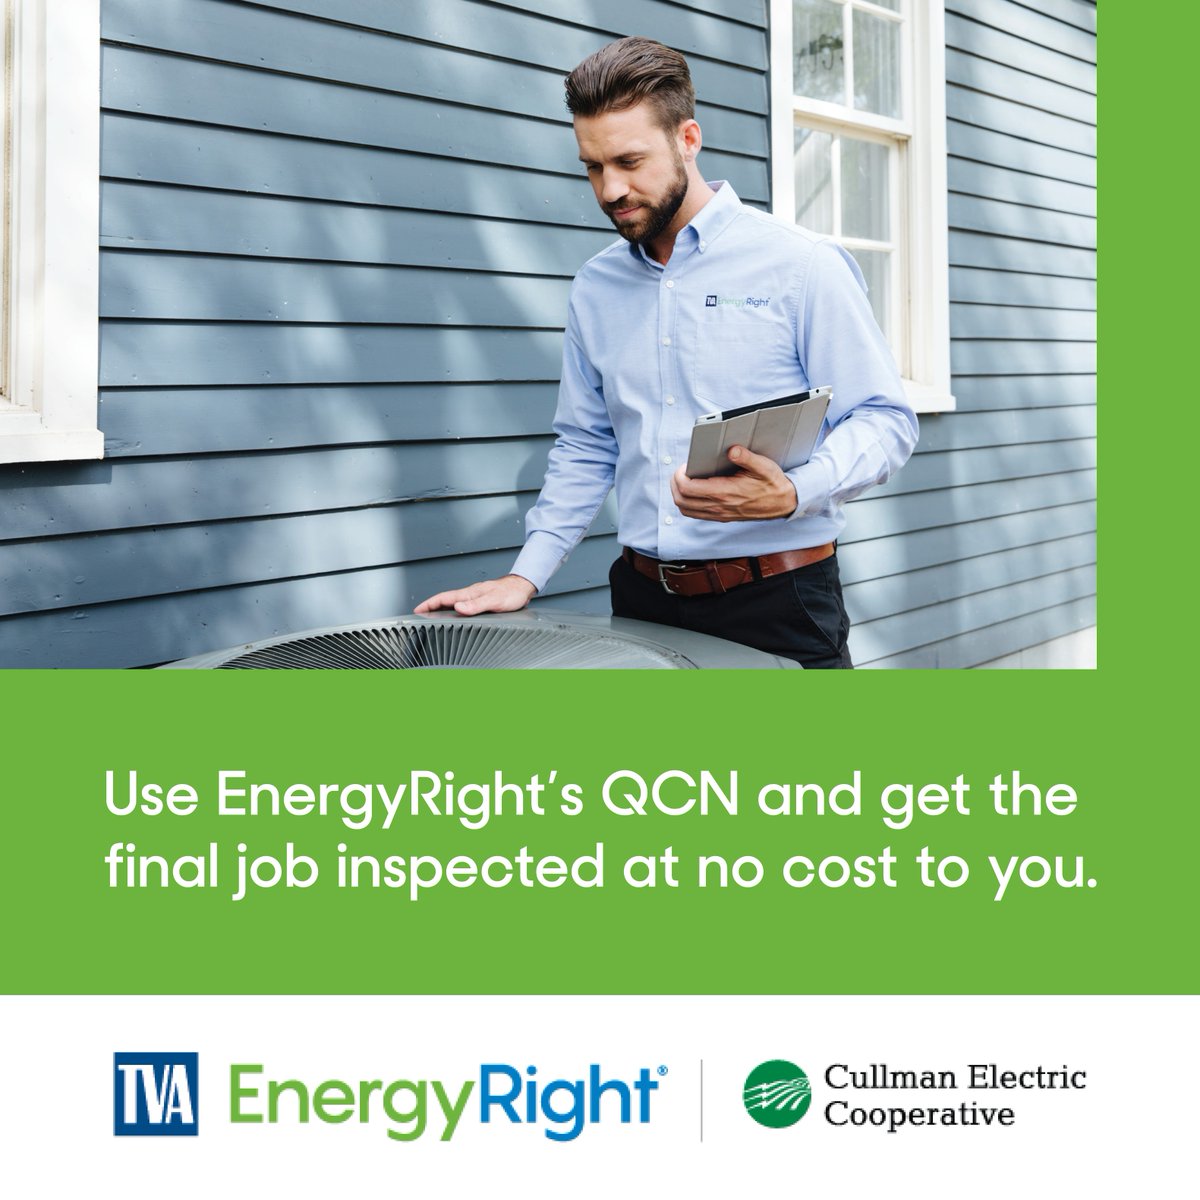 Make sure you hire a certified contractor you can trust! TVA EnergyRight has made finding contractors easy through its Quality Contractor Network (QCN). Visit energyright.mytva.com/Contractor/QCN… to learn more. 

#CullmanEC #PowerfulConnections #BrighterFutures